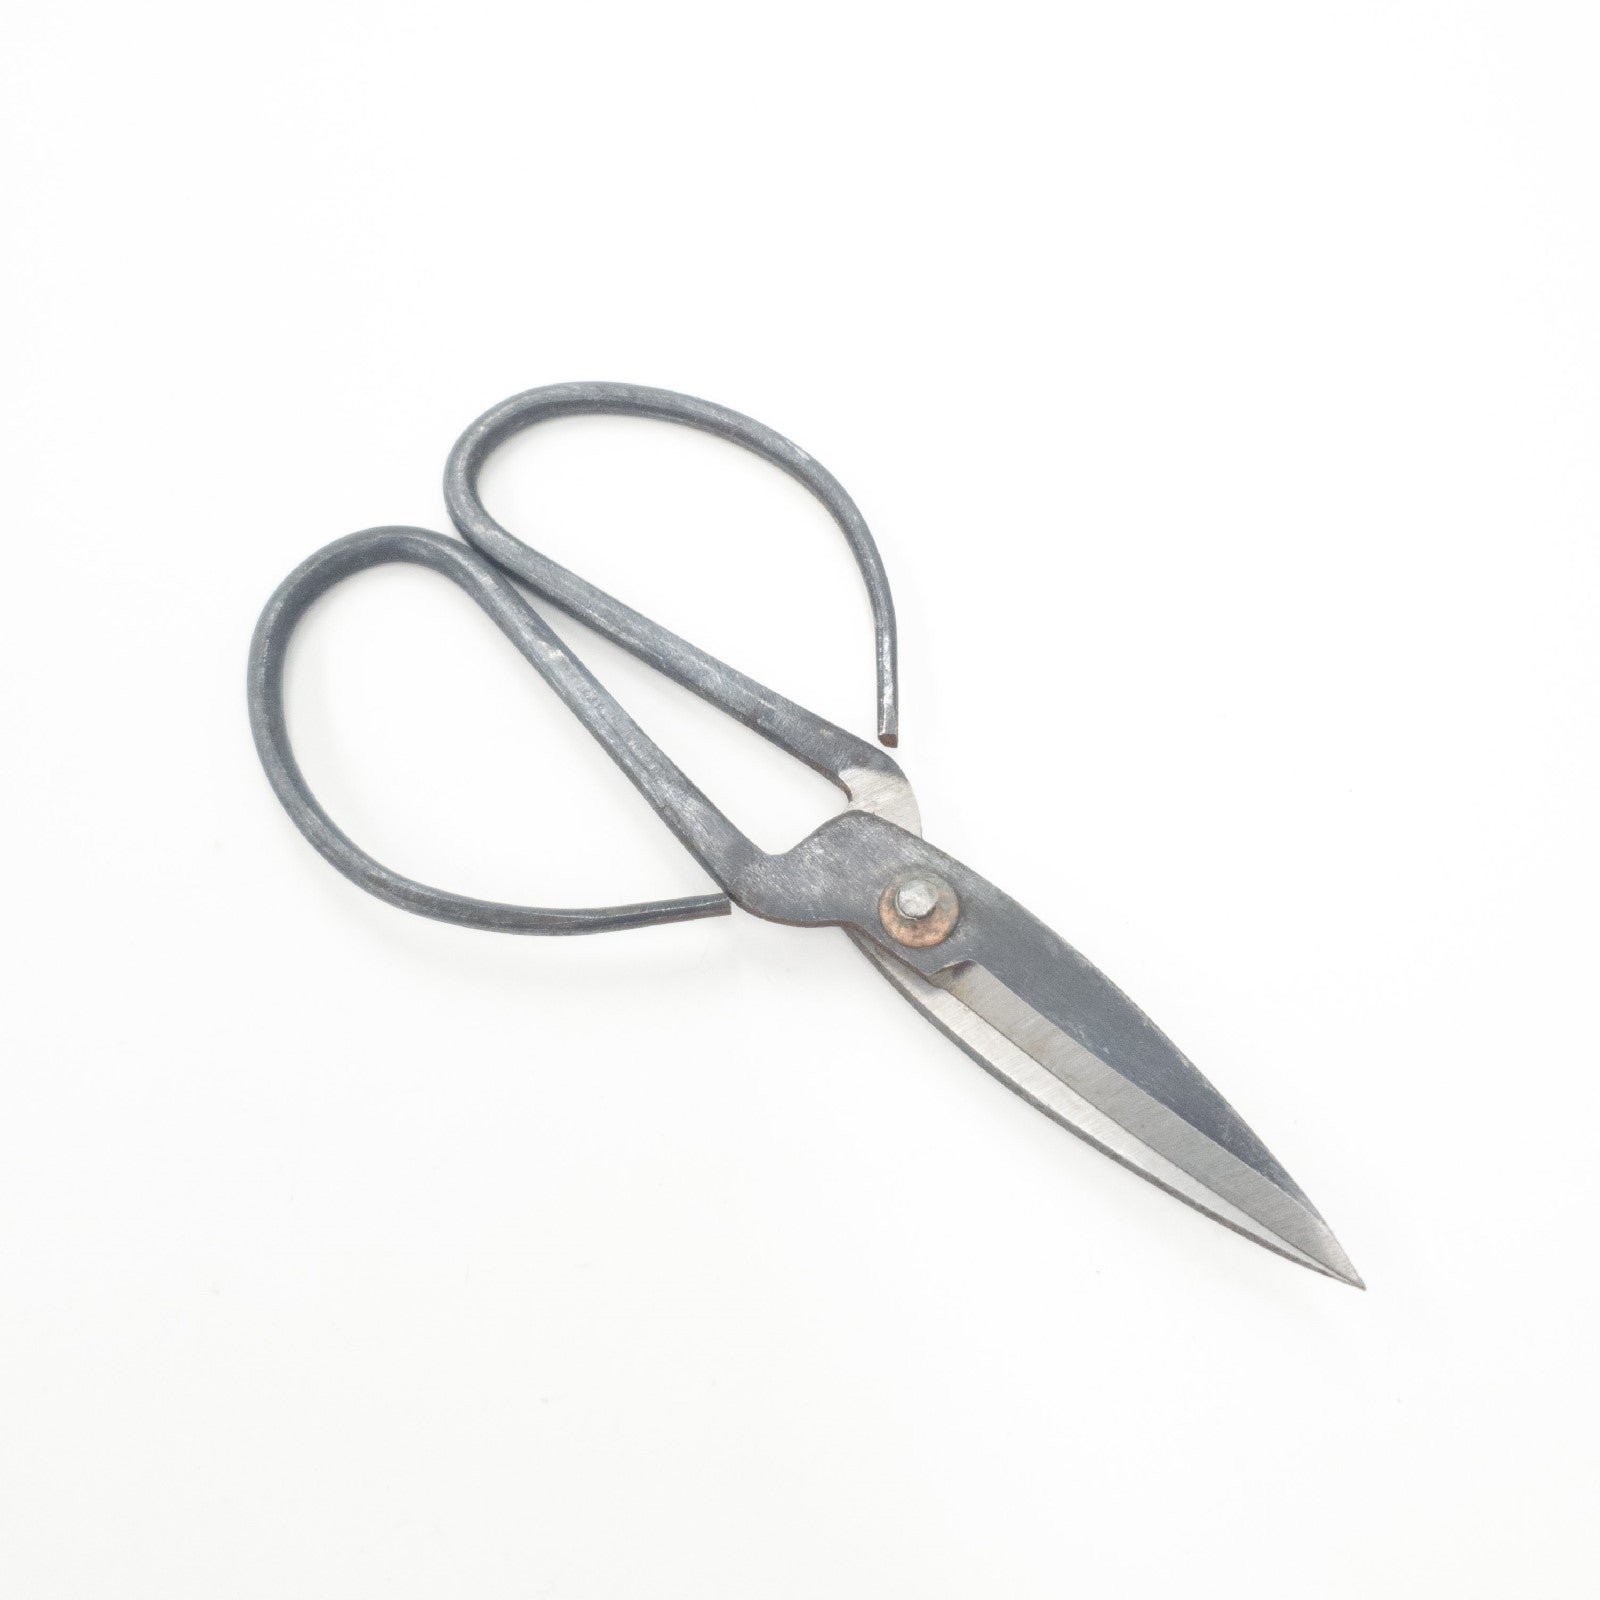 Steel Scissor Leather Tools Chinese Shears Snips, Medium | The Leather Guy